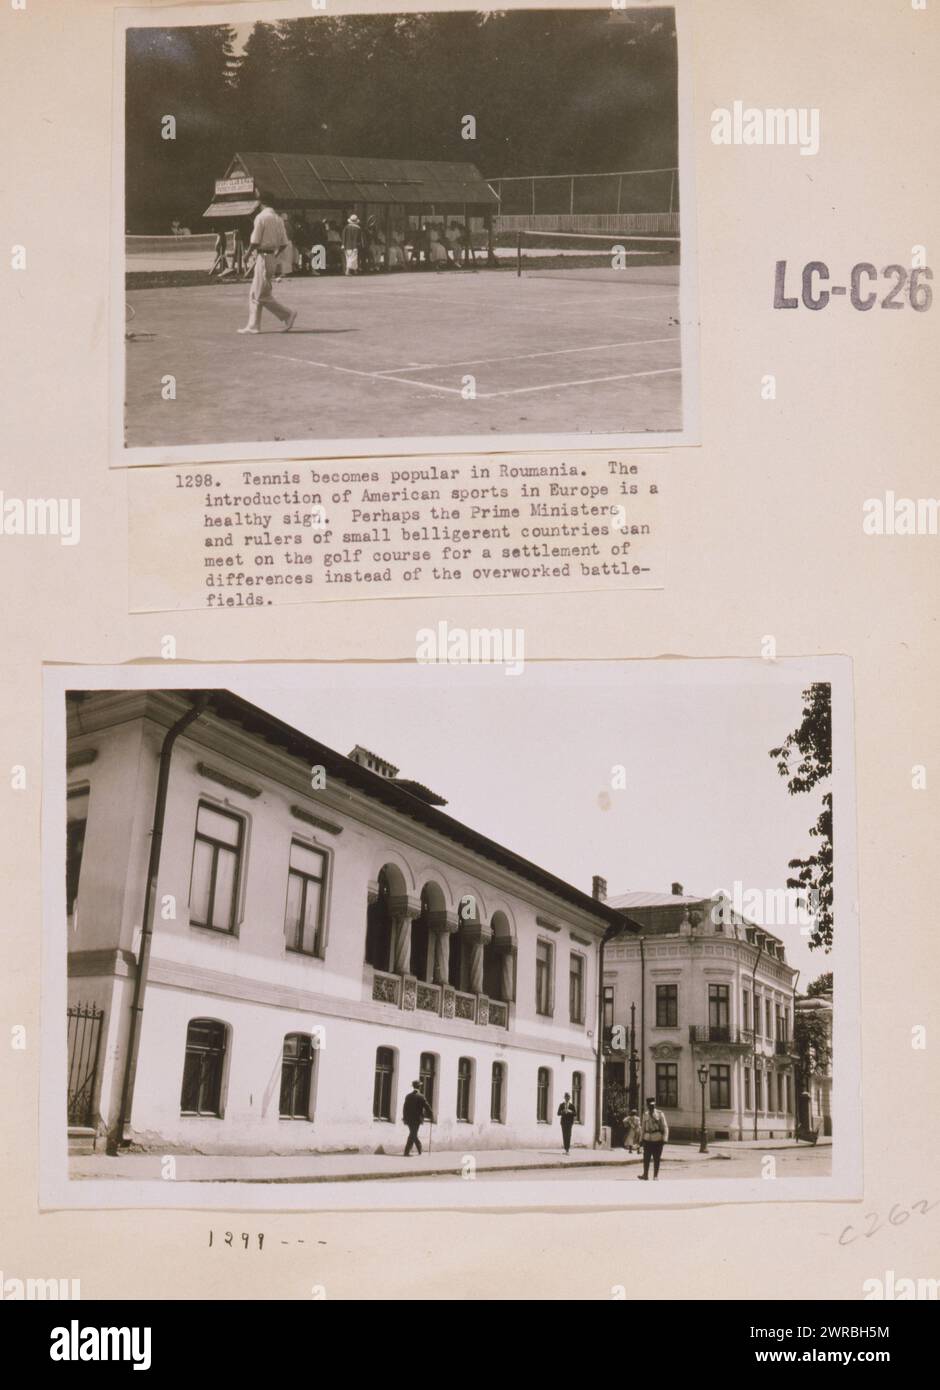 Tennis becomes popular in Roumania. The introduction of American sports in Europe is a healthy sign. Perhaps the prime ministers and rulers of small belligerent countries can meet on the golf course for a settlement of differences instead of the overworked battlefields Building on the street, Romania, Photographs show scenes in Romania including a man on a tennis court and an unidentified building in Romania., Carpenter, Frank G. (Frank George), 1855-1924, photographer, 1923., Tennis, Romania, 1920-1930, Gelatin silver prints, 1920-1930., Gelatin silver prints, 1920-1930 Stock Photo